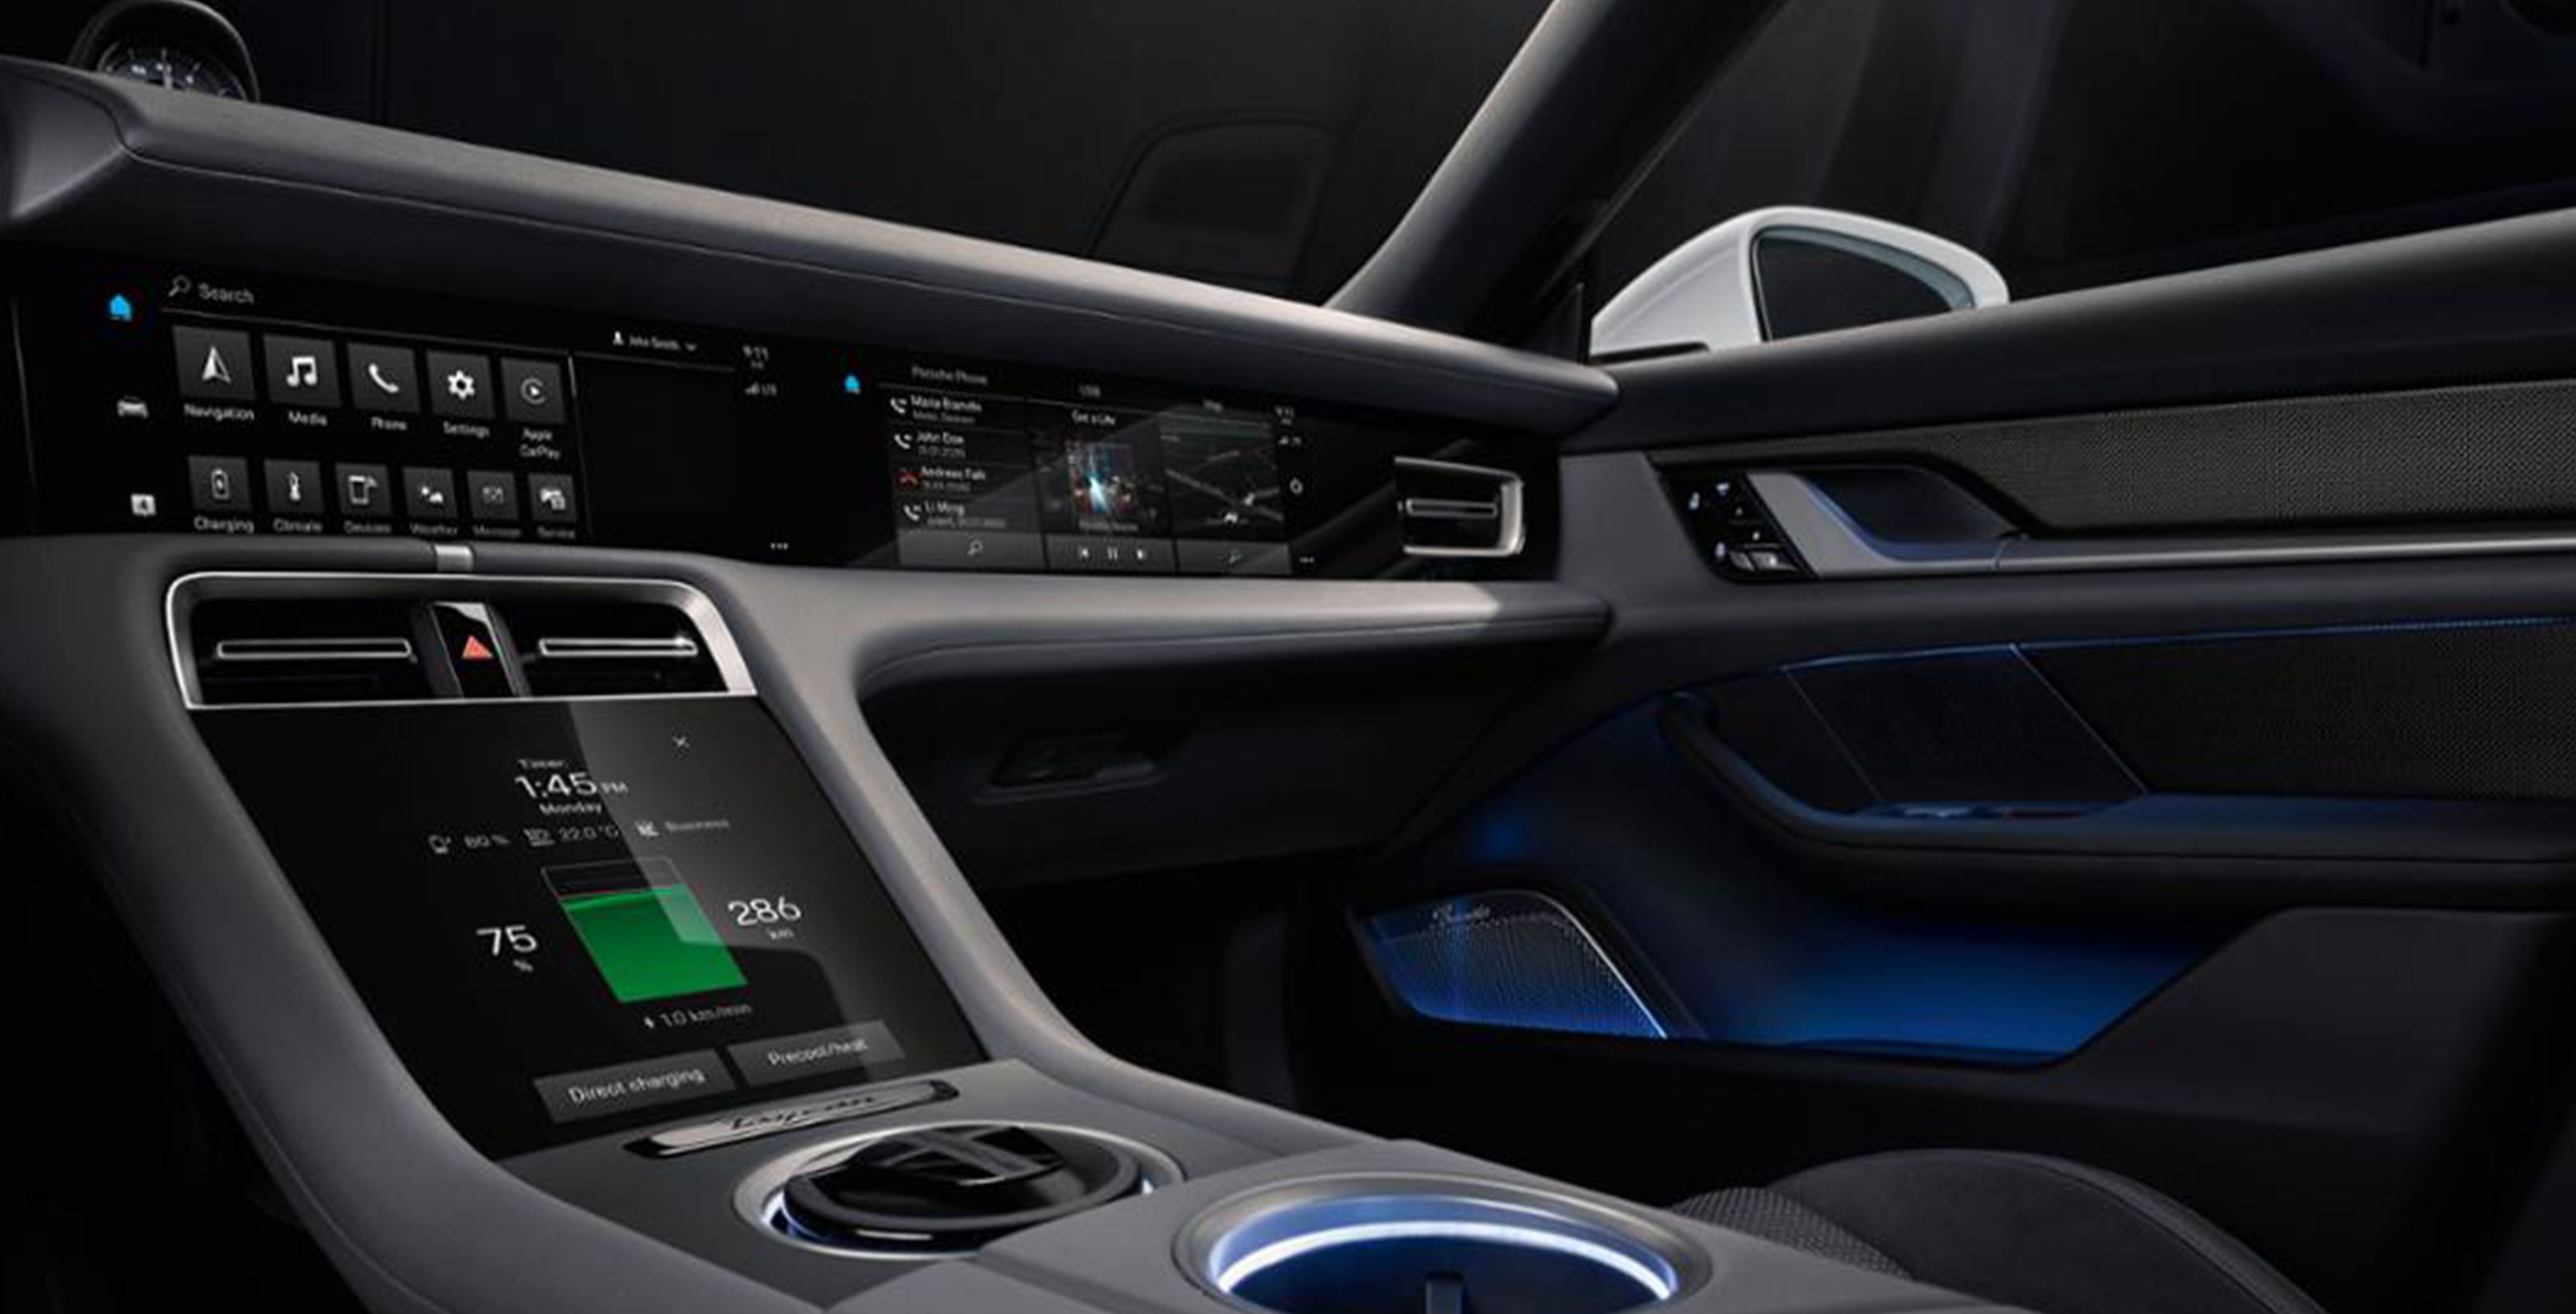 Porsche's Taycan EV interior has lots of touch screens and voice